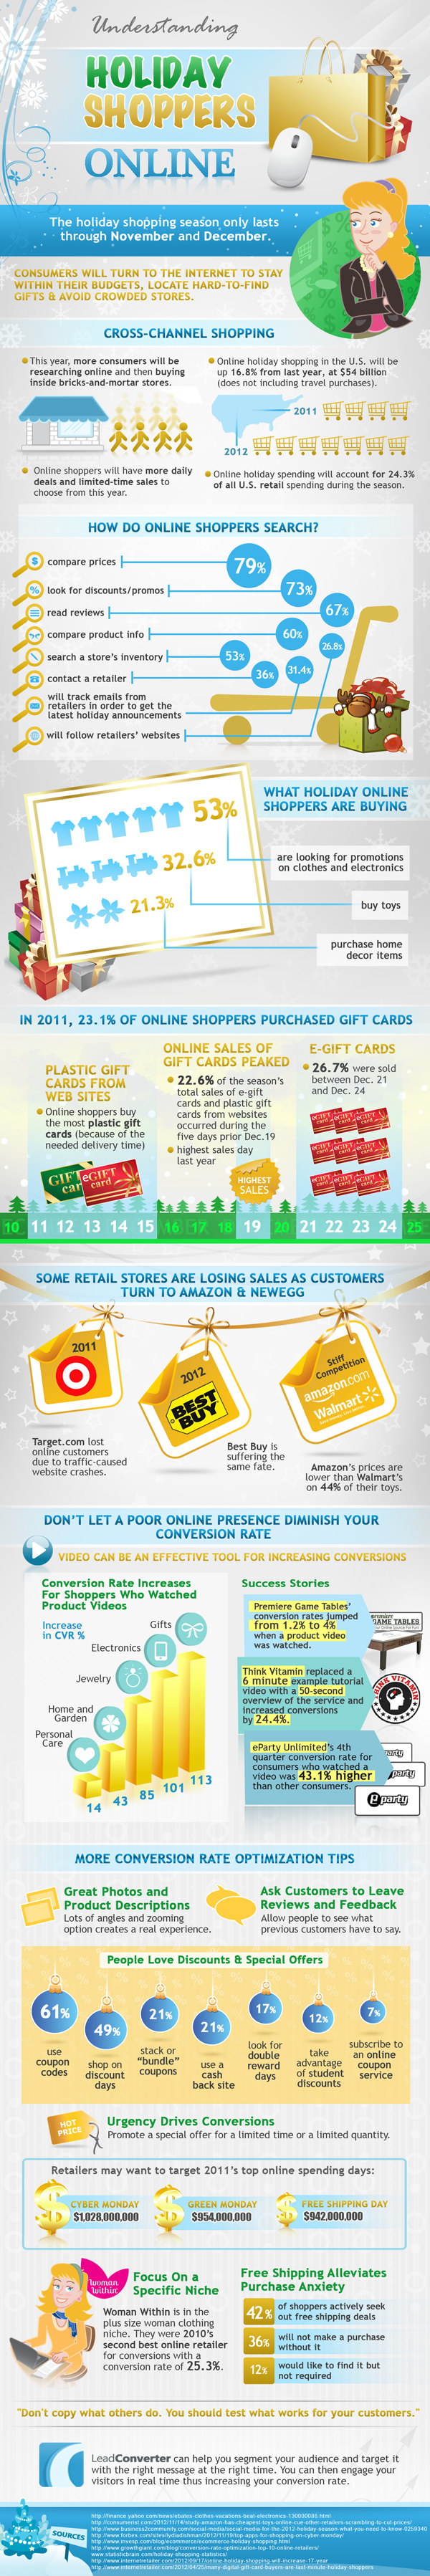 Online_Holiday_Shoppers_Behavior_600px